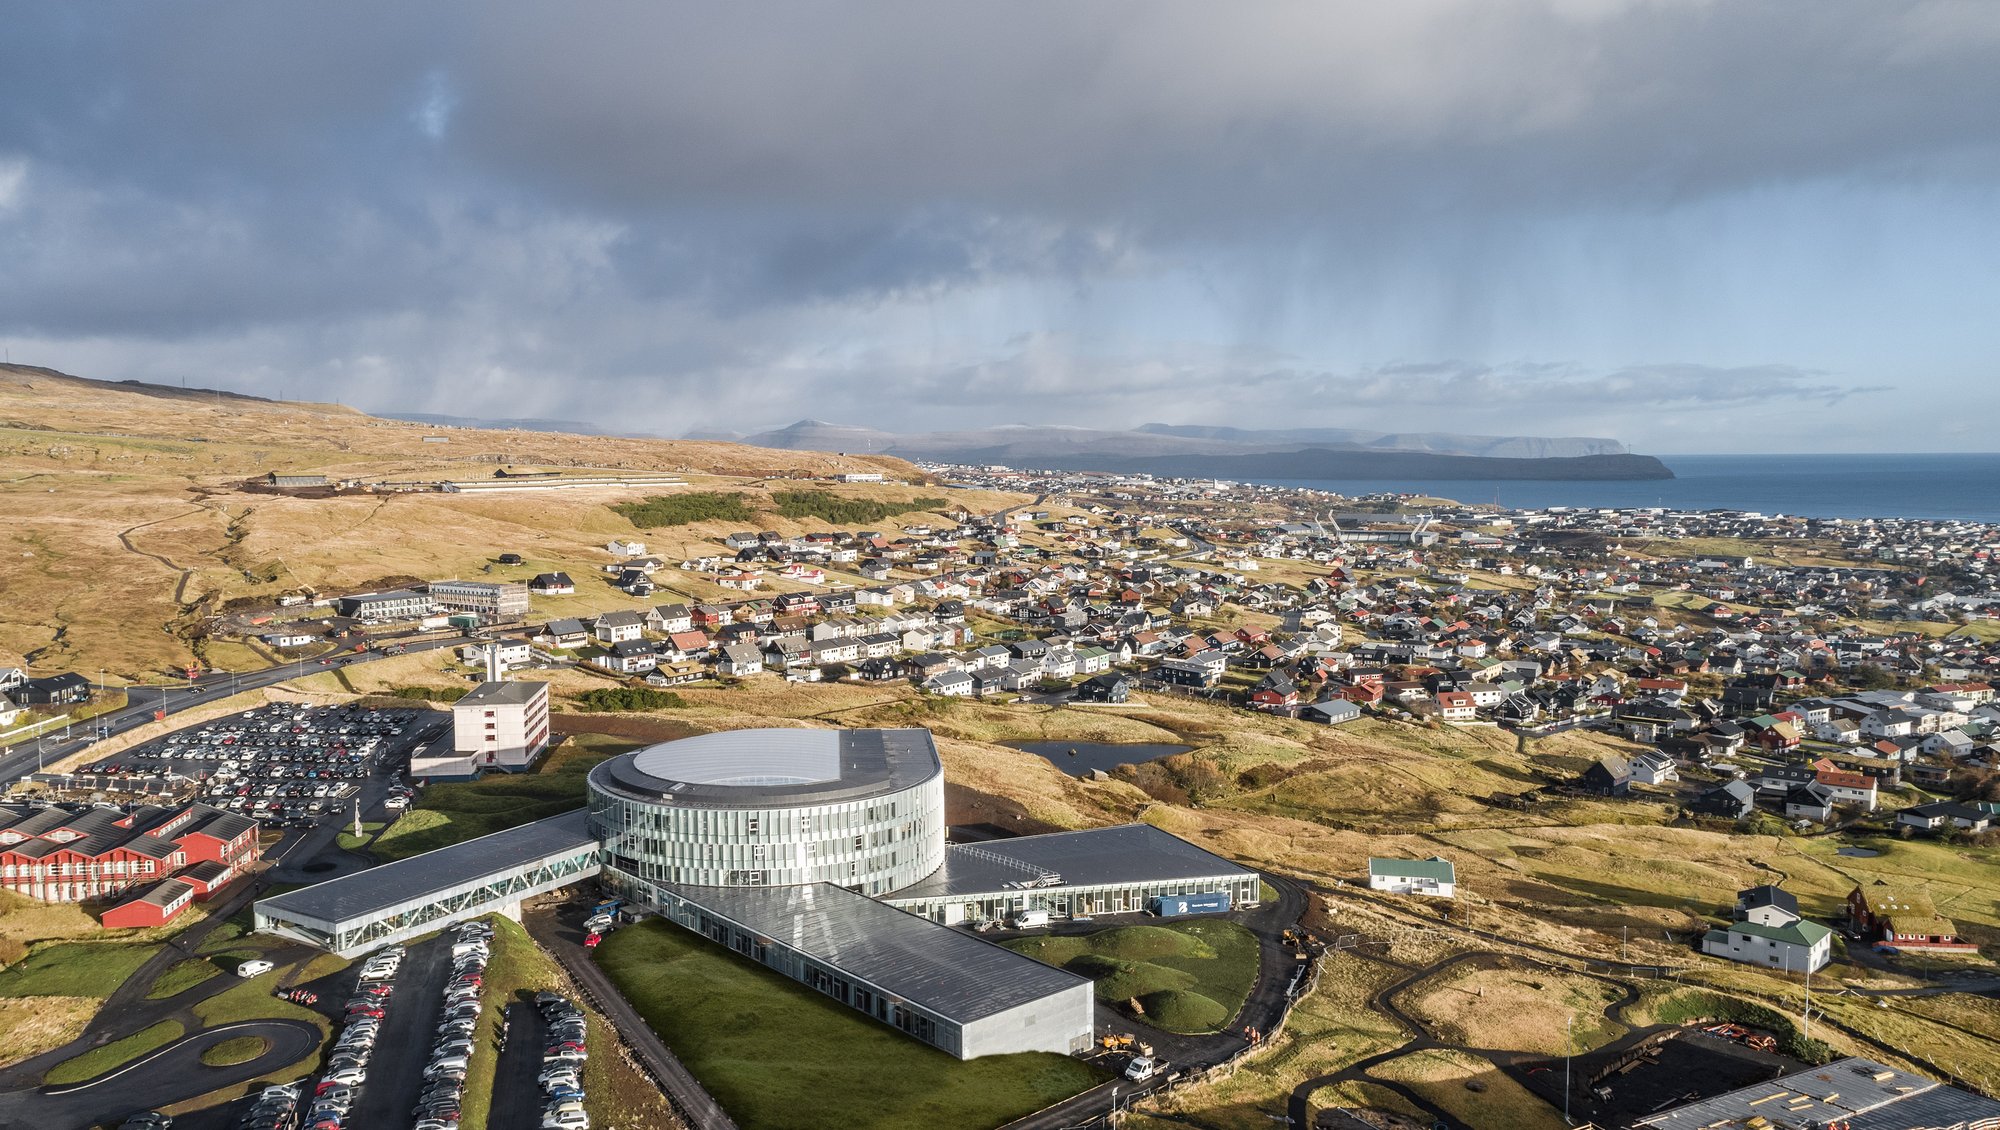 Picture taken from up high, propably a helicopter. Shows the city of Tórshavn and Glasir. The Glasir building is round shaped with glass windows all around. Three rectangular buildings are then connected all around the building.